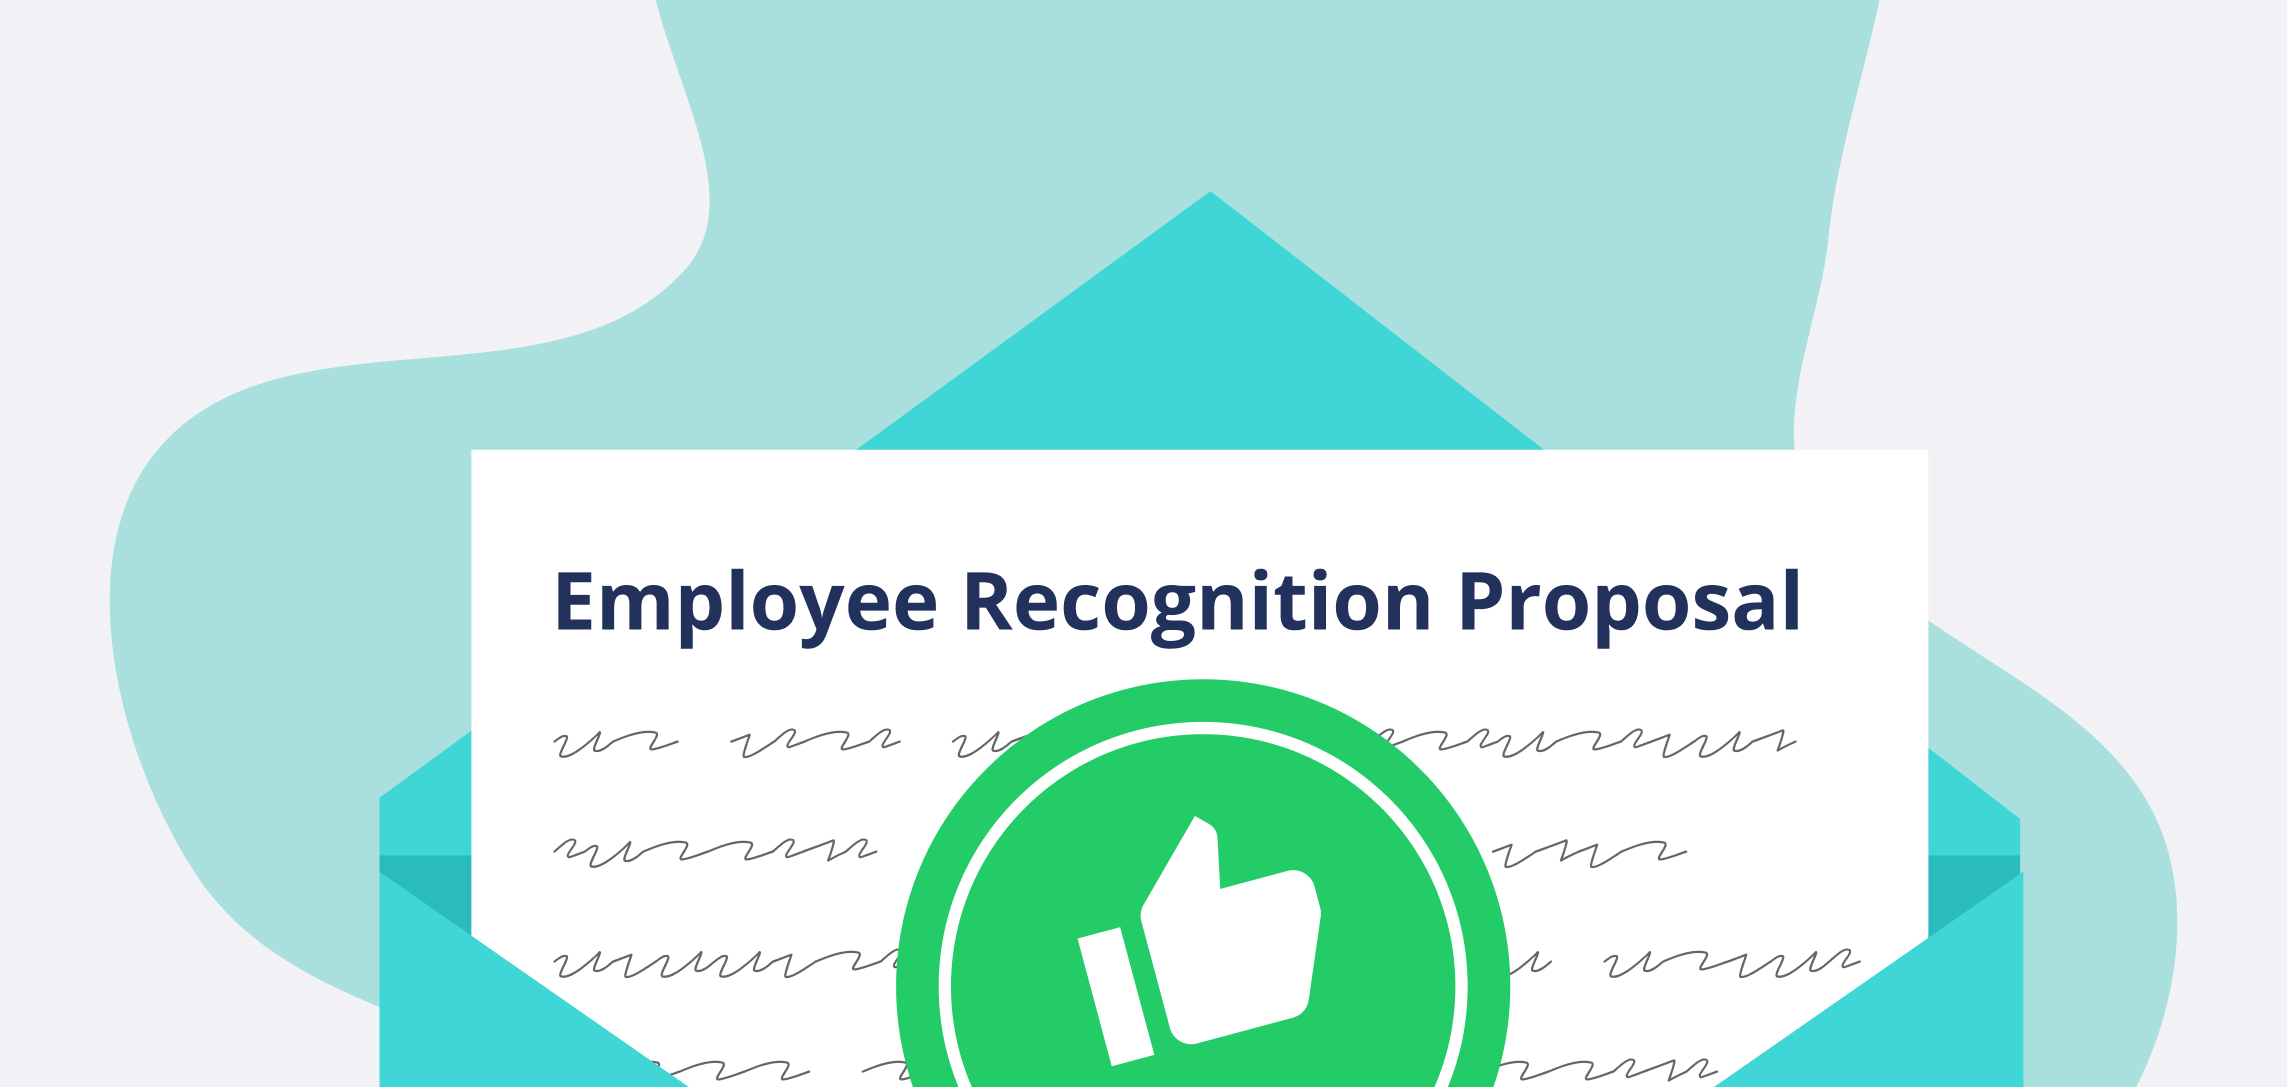 Build an employee recognition program proposal in 5 steps